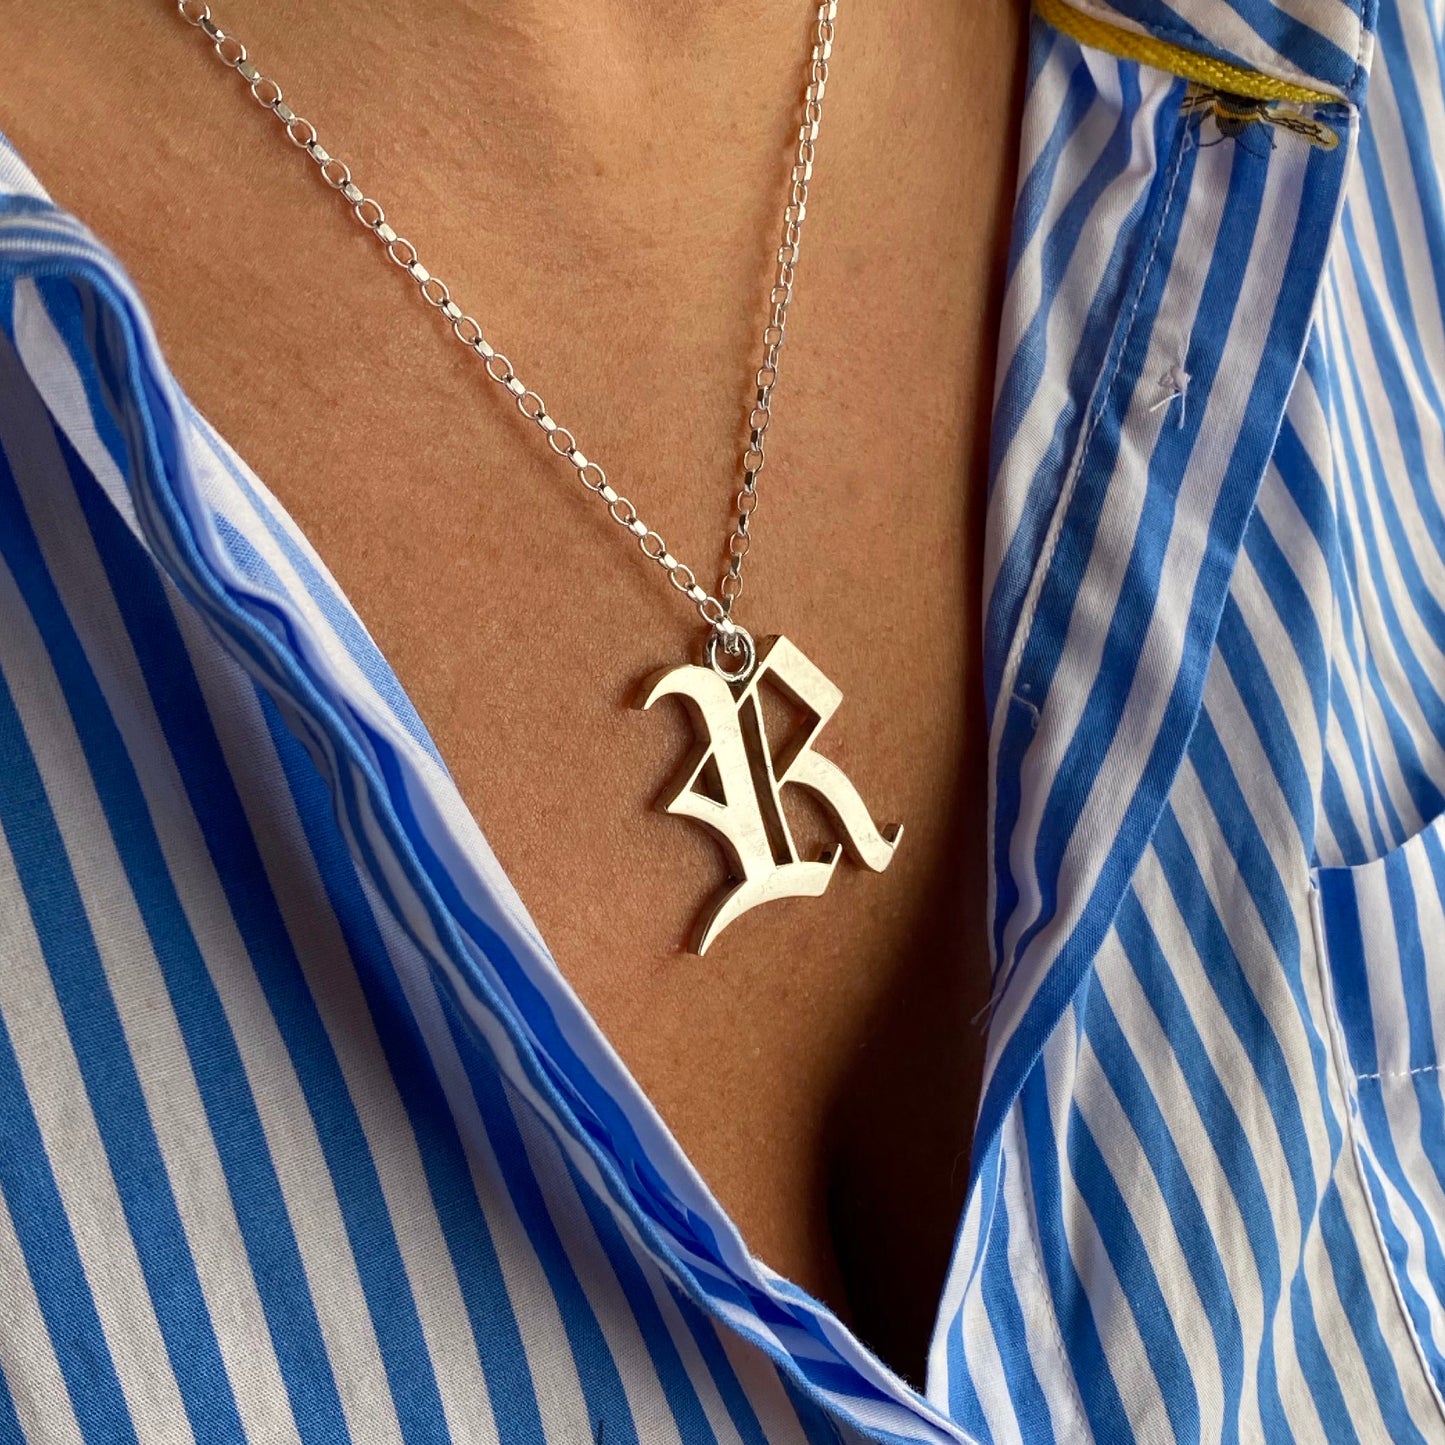 Solid silver letter necklace